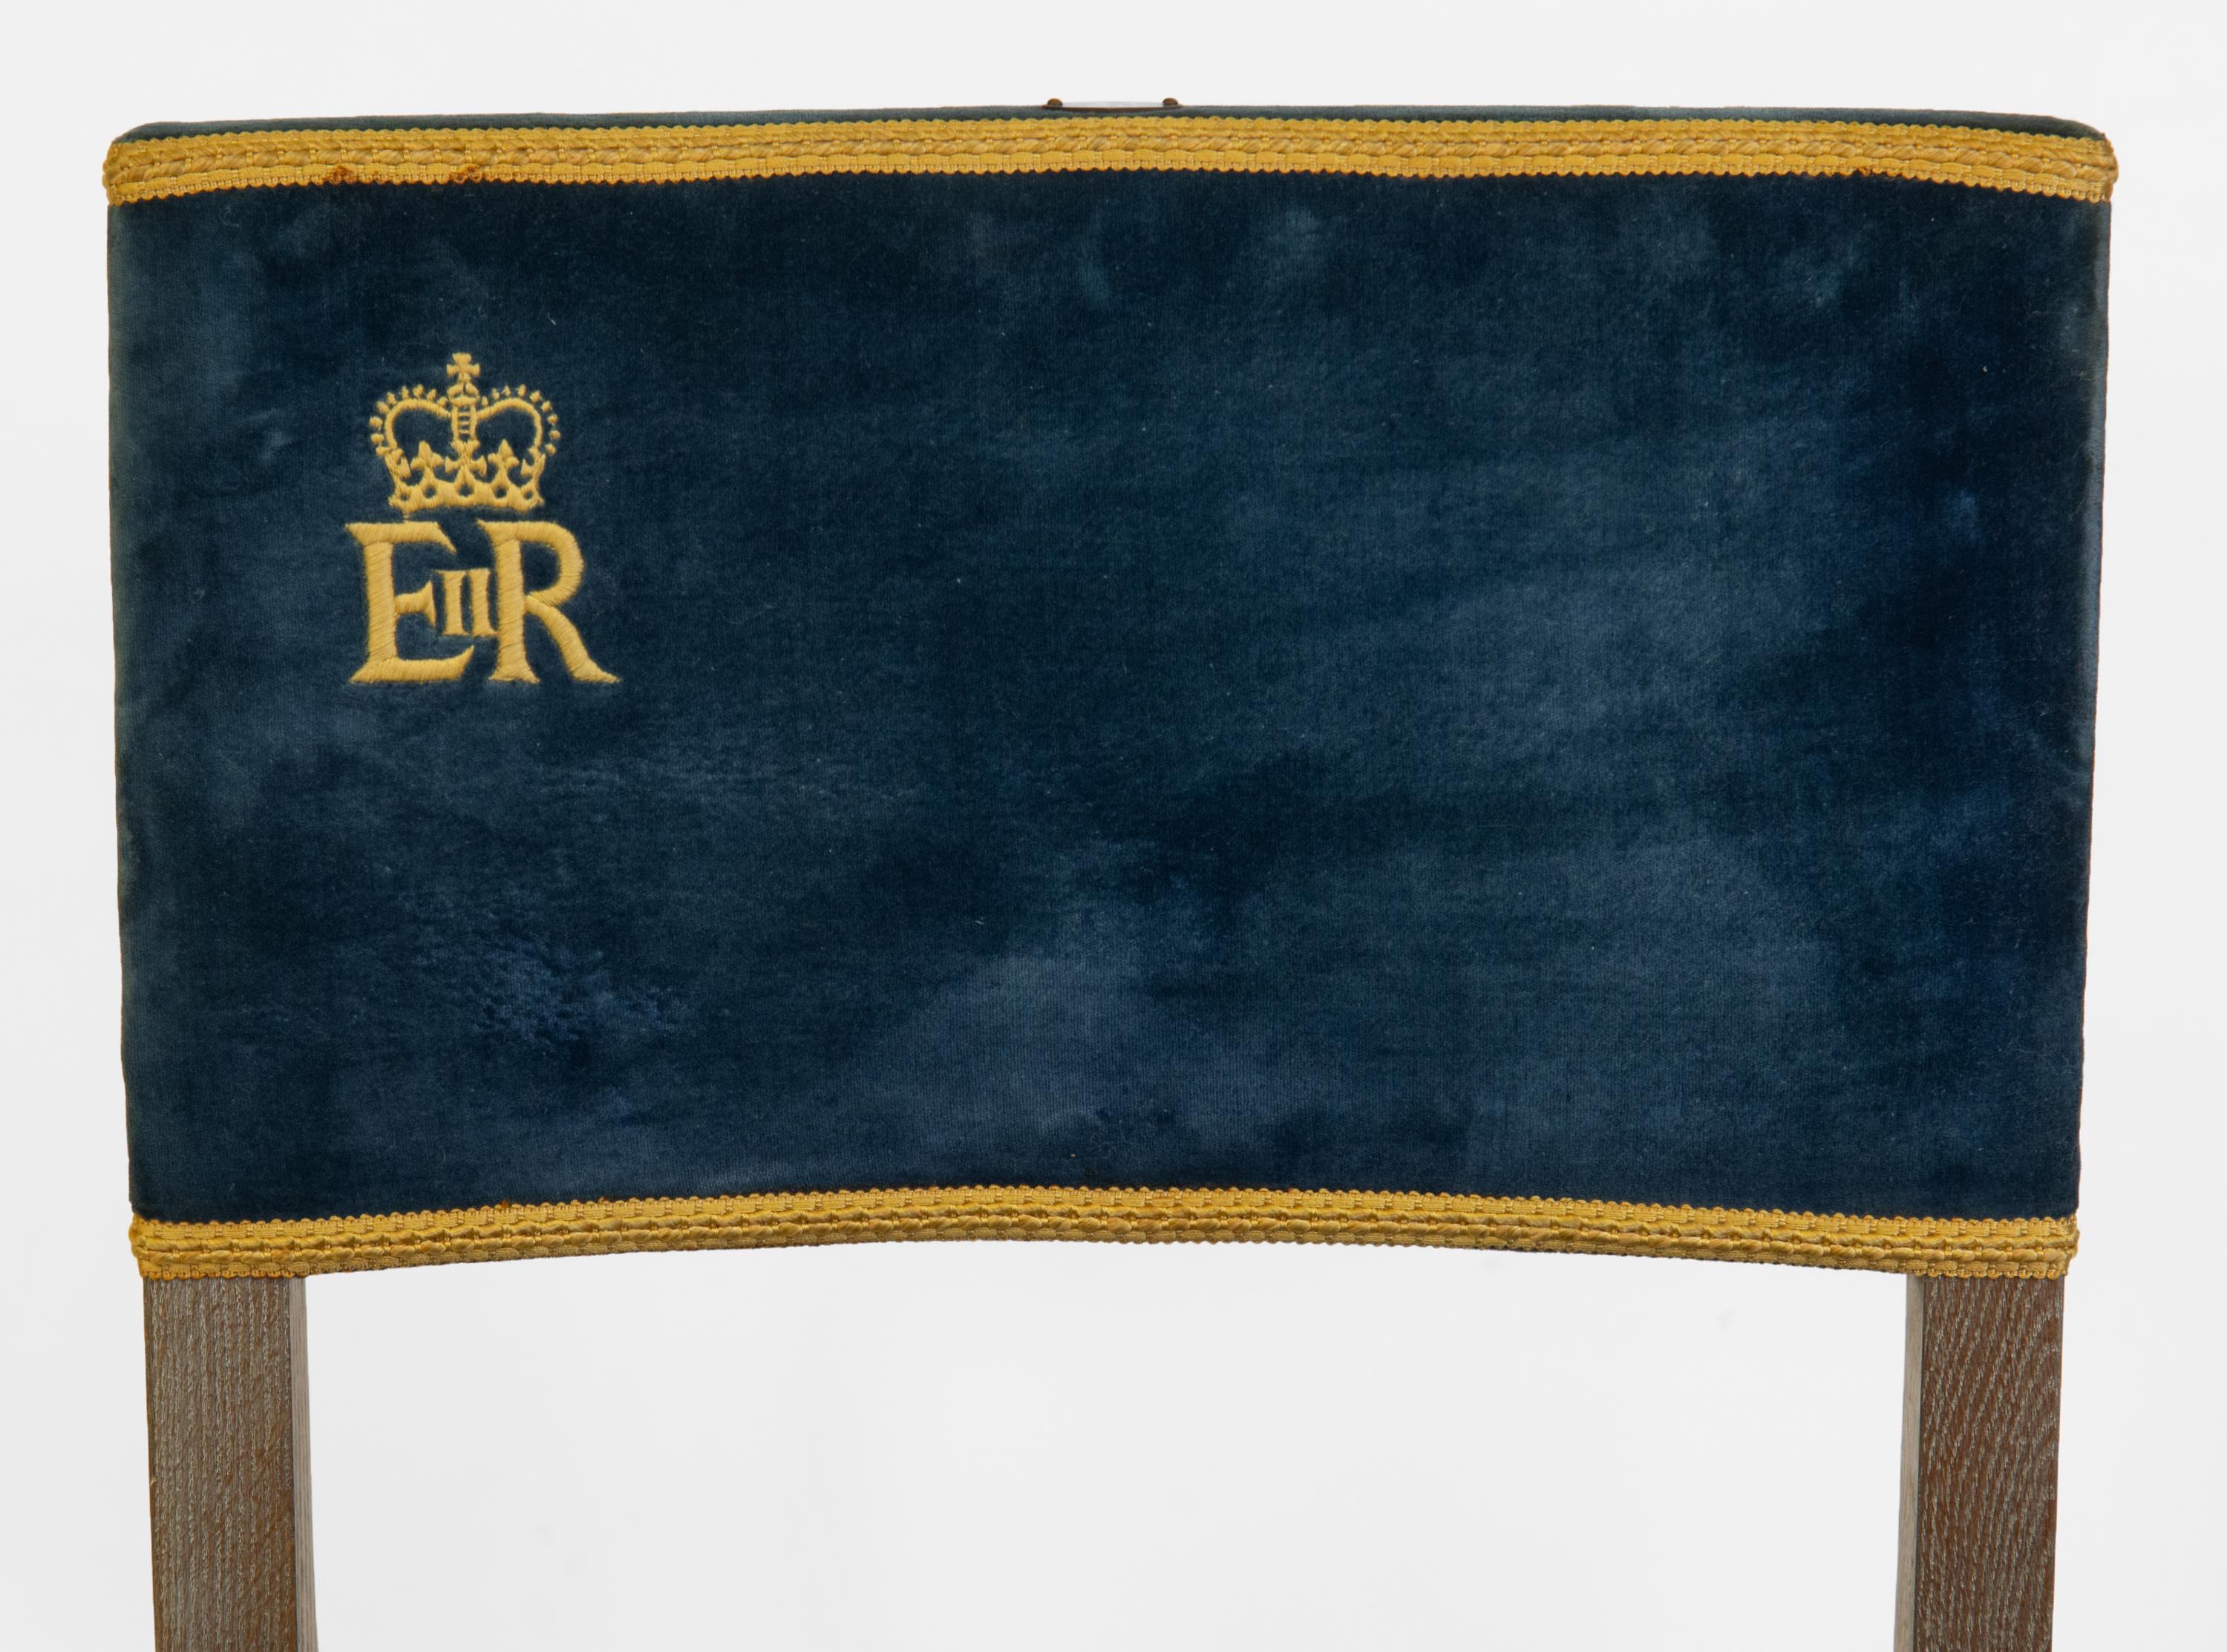 Original Queen Elizabeth II Coronation chair. 1953.

The chair is in original un-touched condition, and is an excellent example, showing very light signs of use, the velvet and braiding still with good colour. 

Made in solid English oak with silver